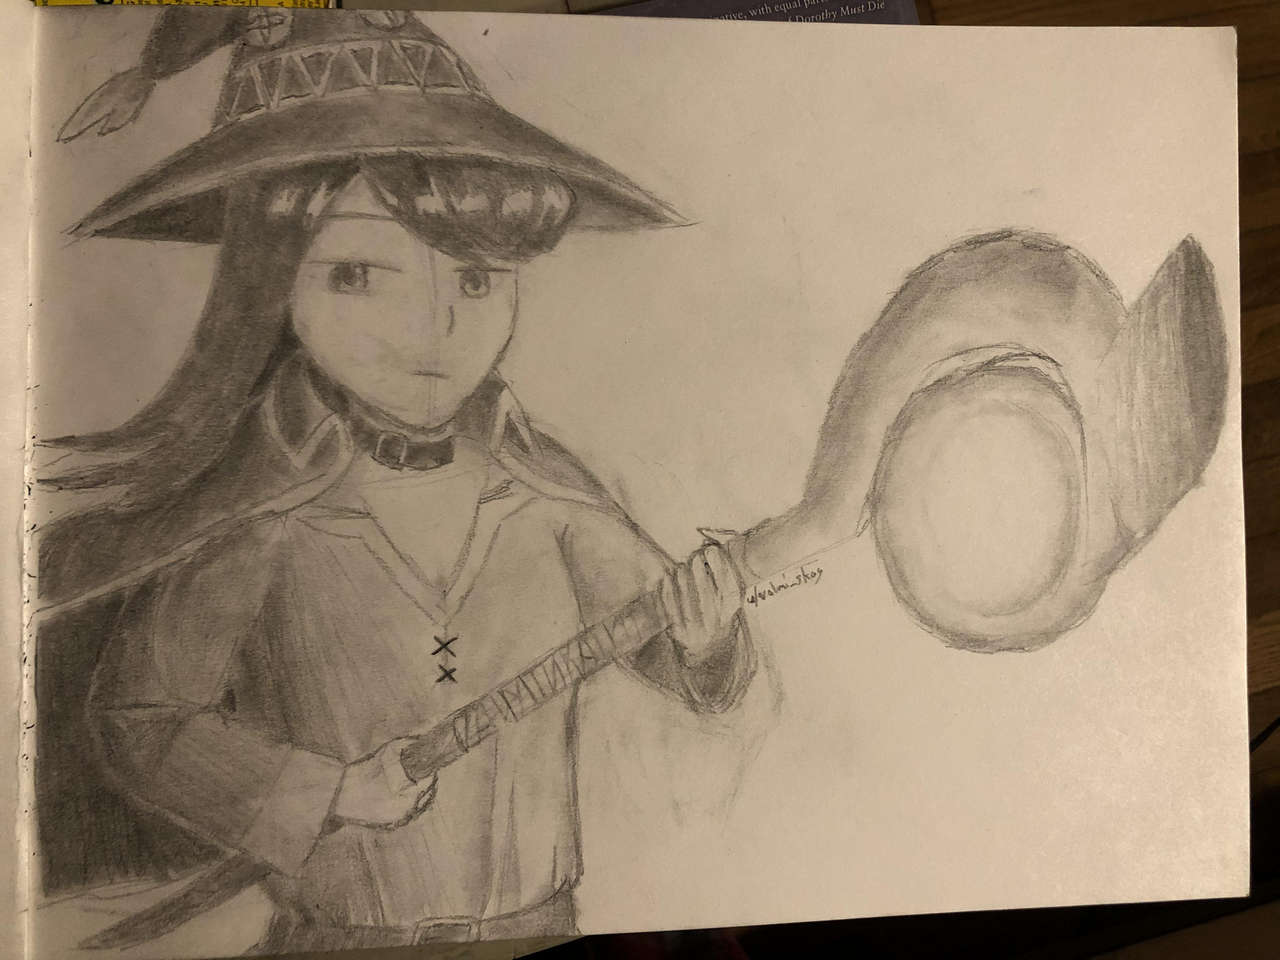 My Rough Draft Of Komi San Cosplaying Megumin For A Project In Art Clas